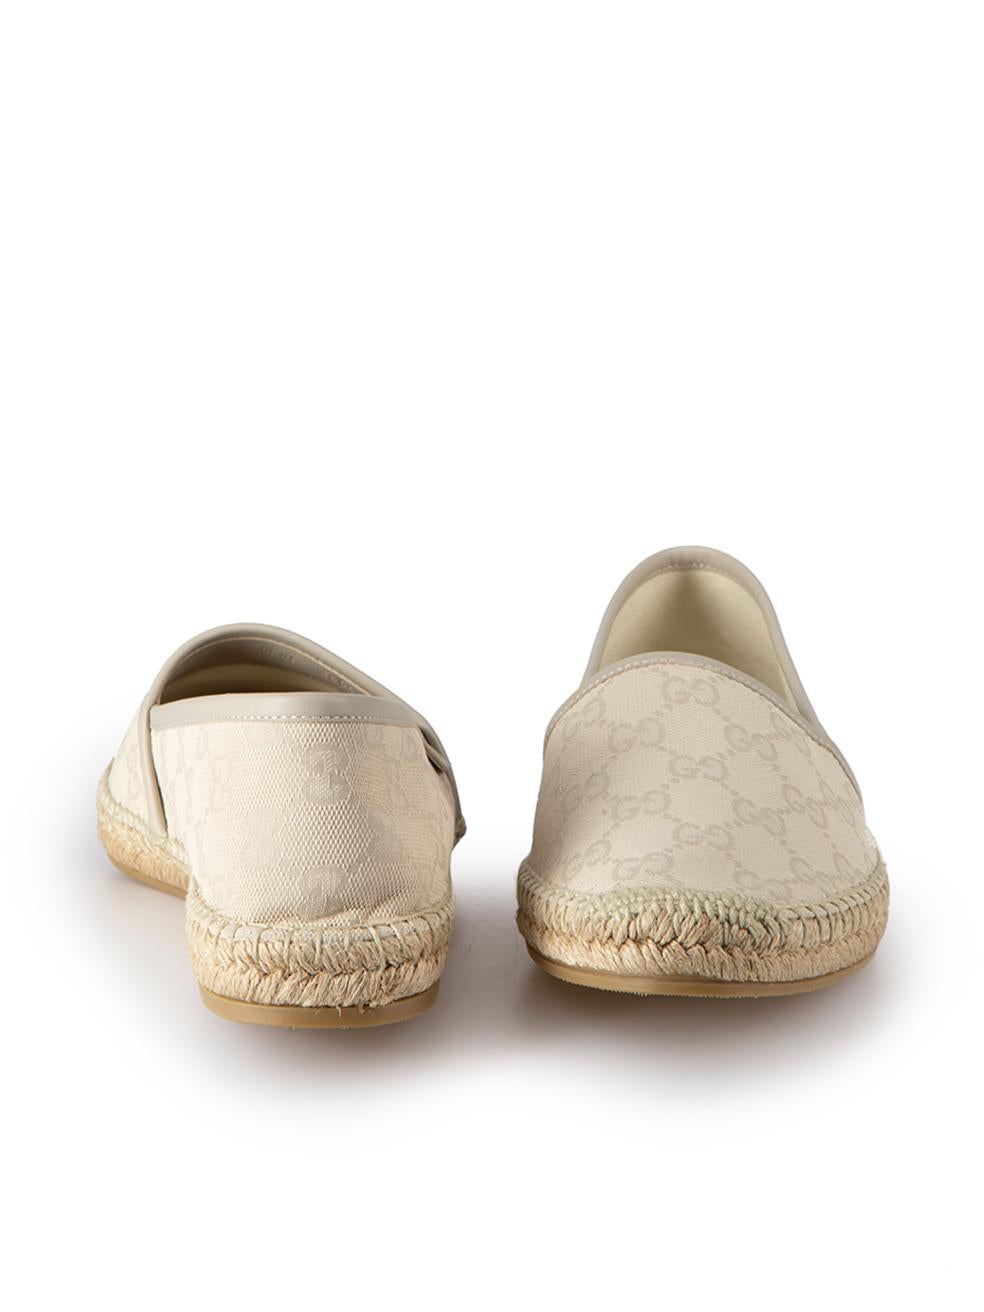 Cream Canvas GG Supreme Espadrilles Size IT 39 In Good Condition For Sale In London, GB